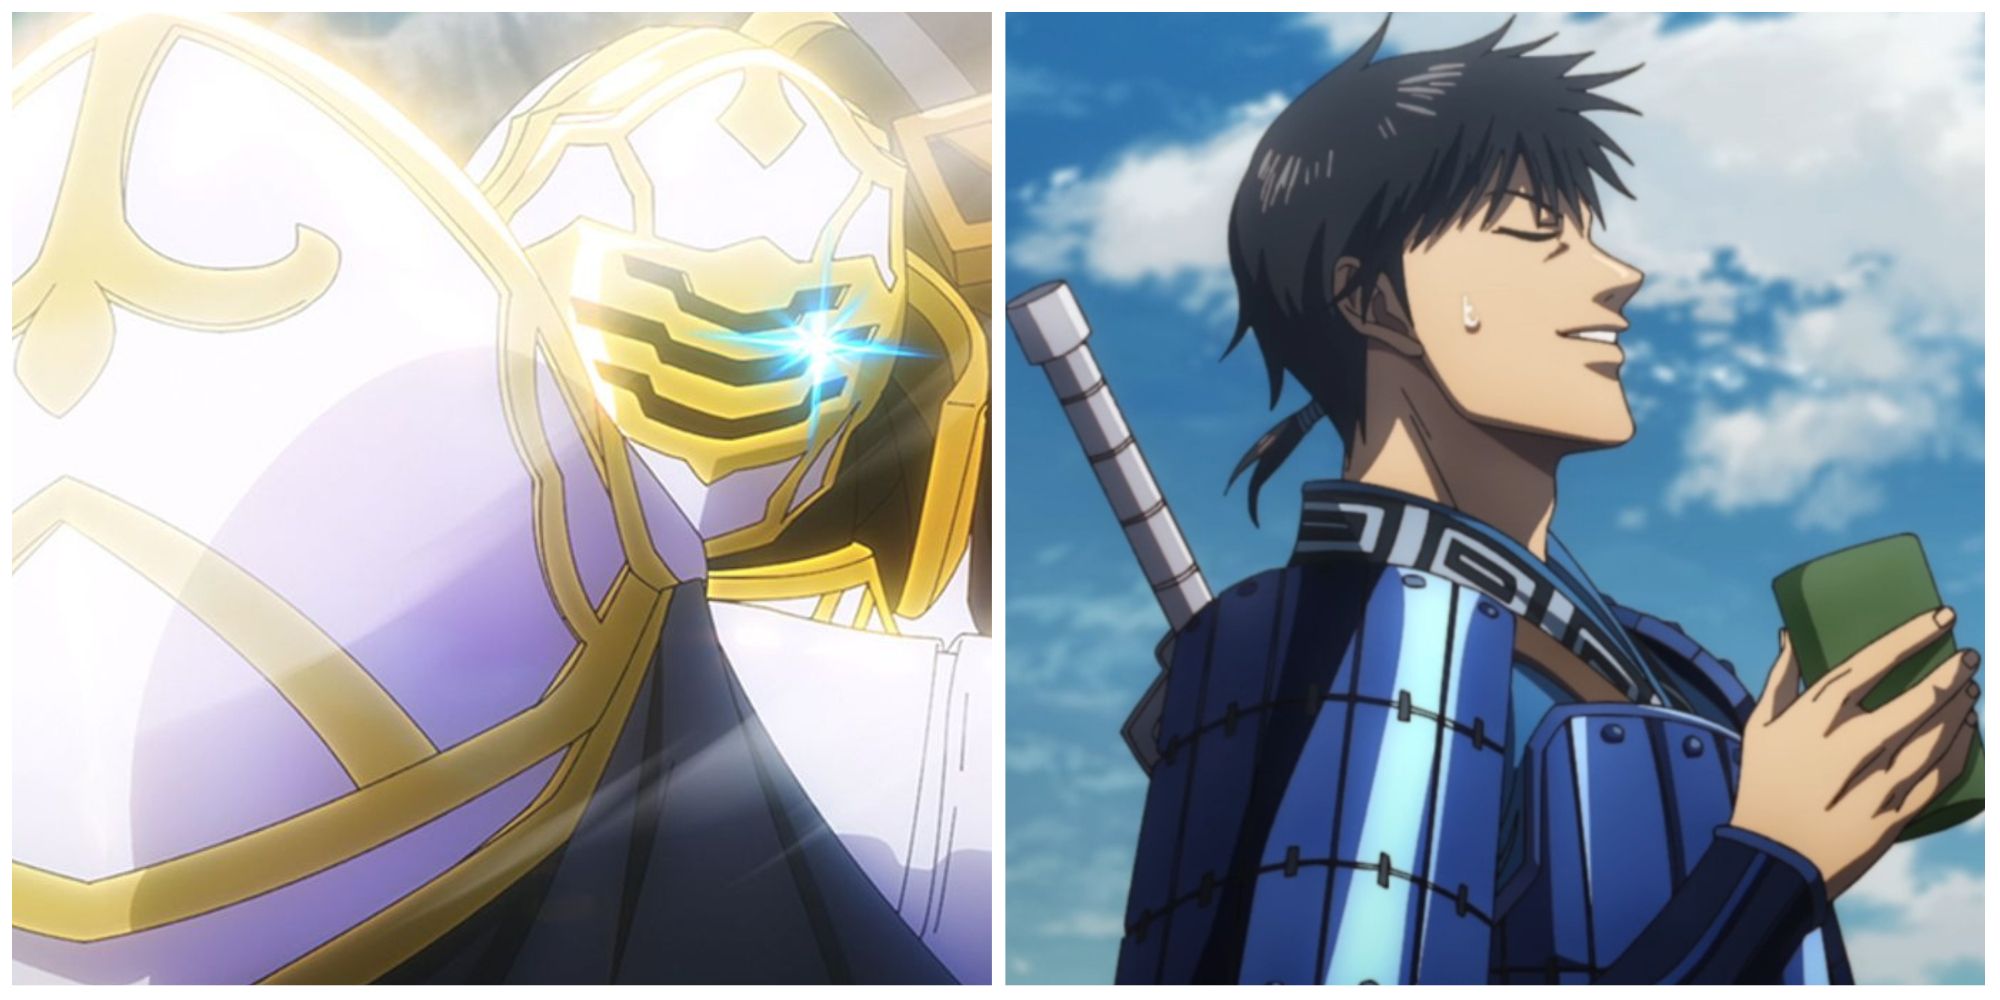 The Best Male Characters Of The Spring 2022 Anime Season